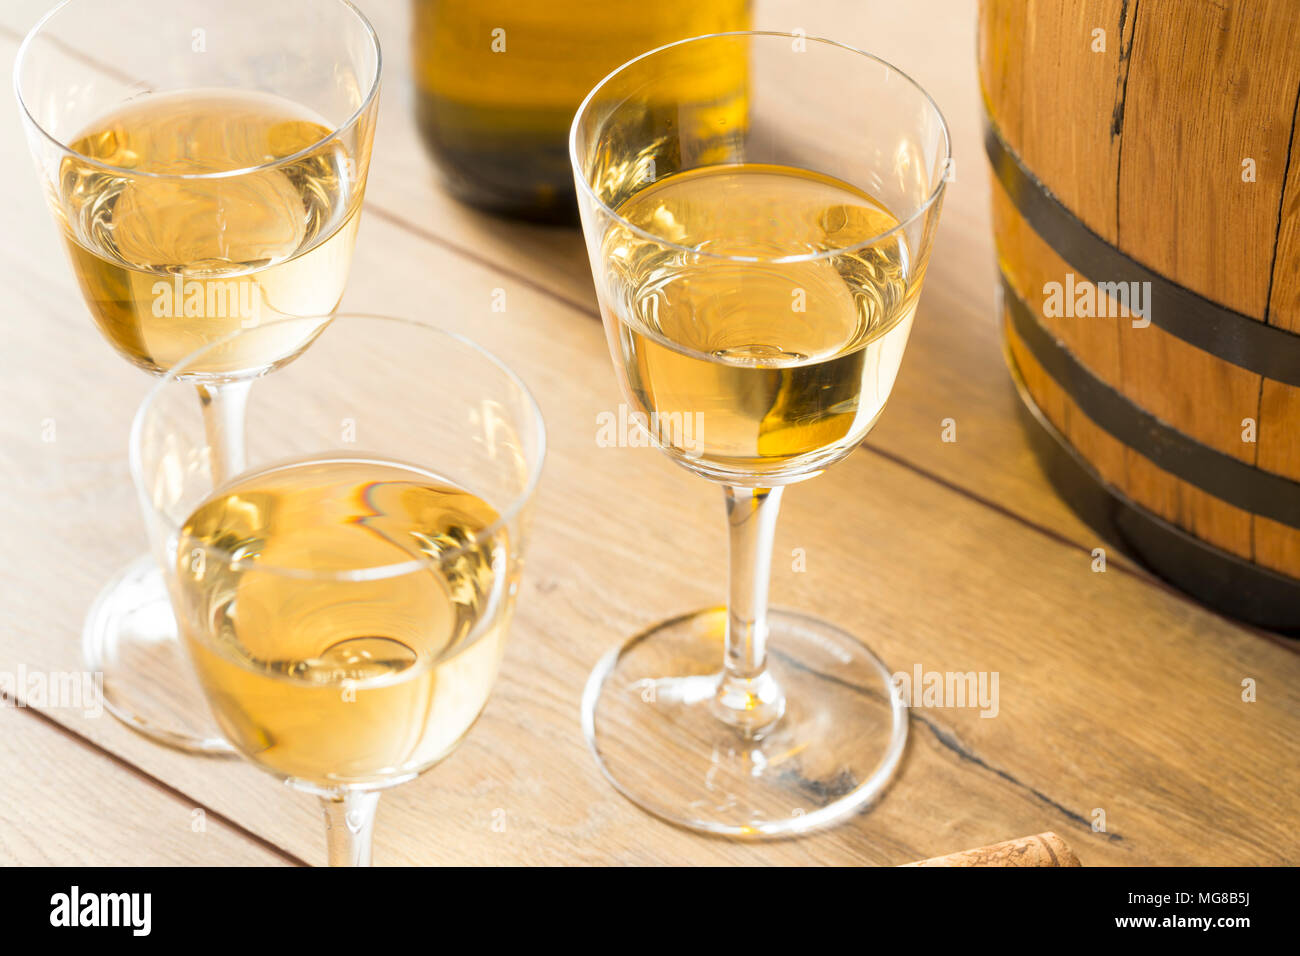 Dry French Sherry Dessert Wine in a Glass Stock Photo